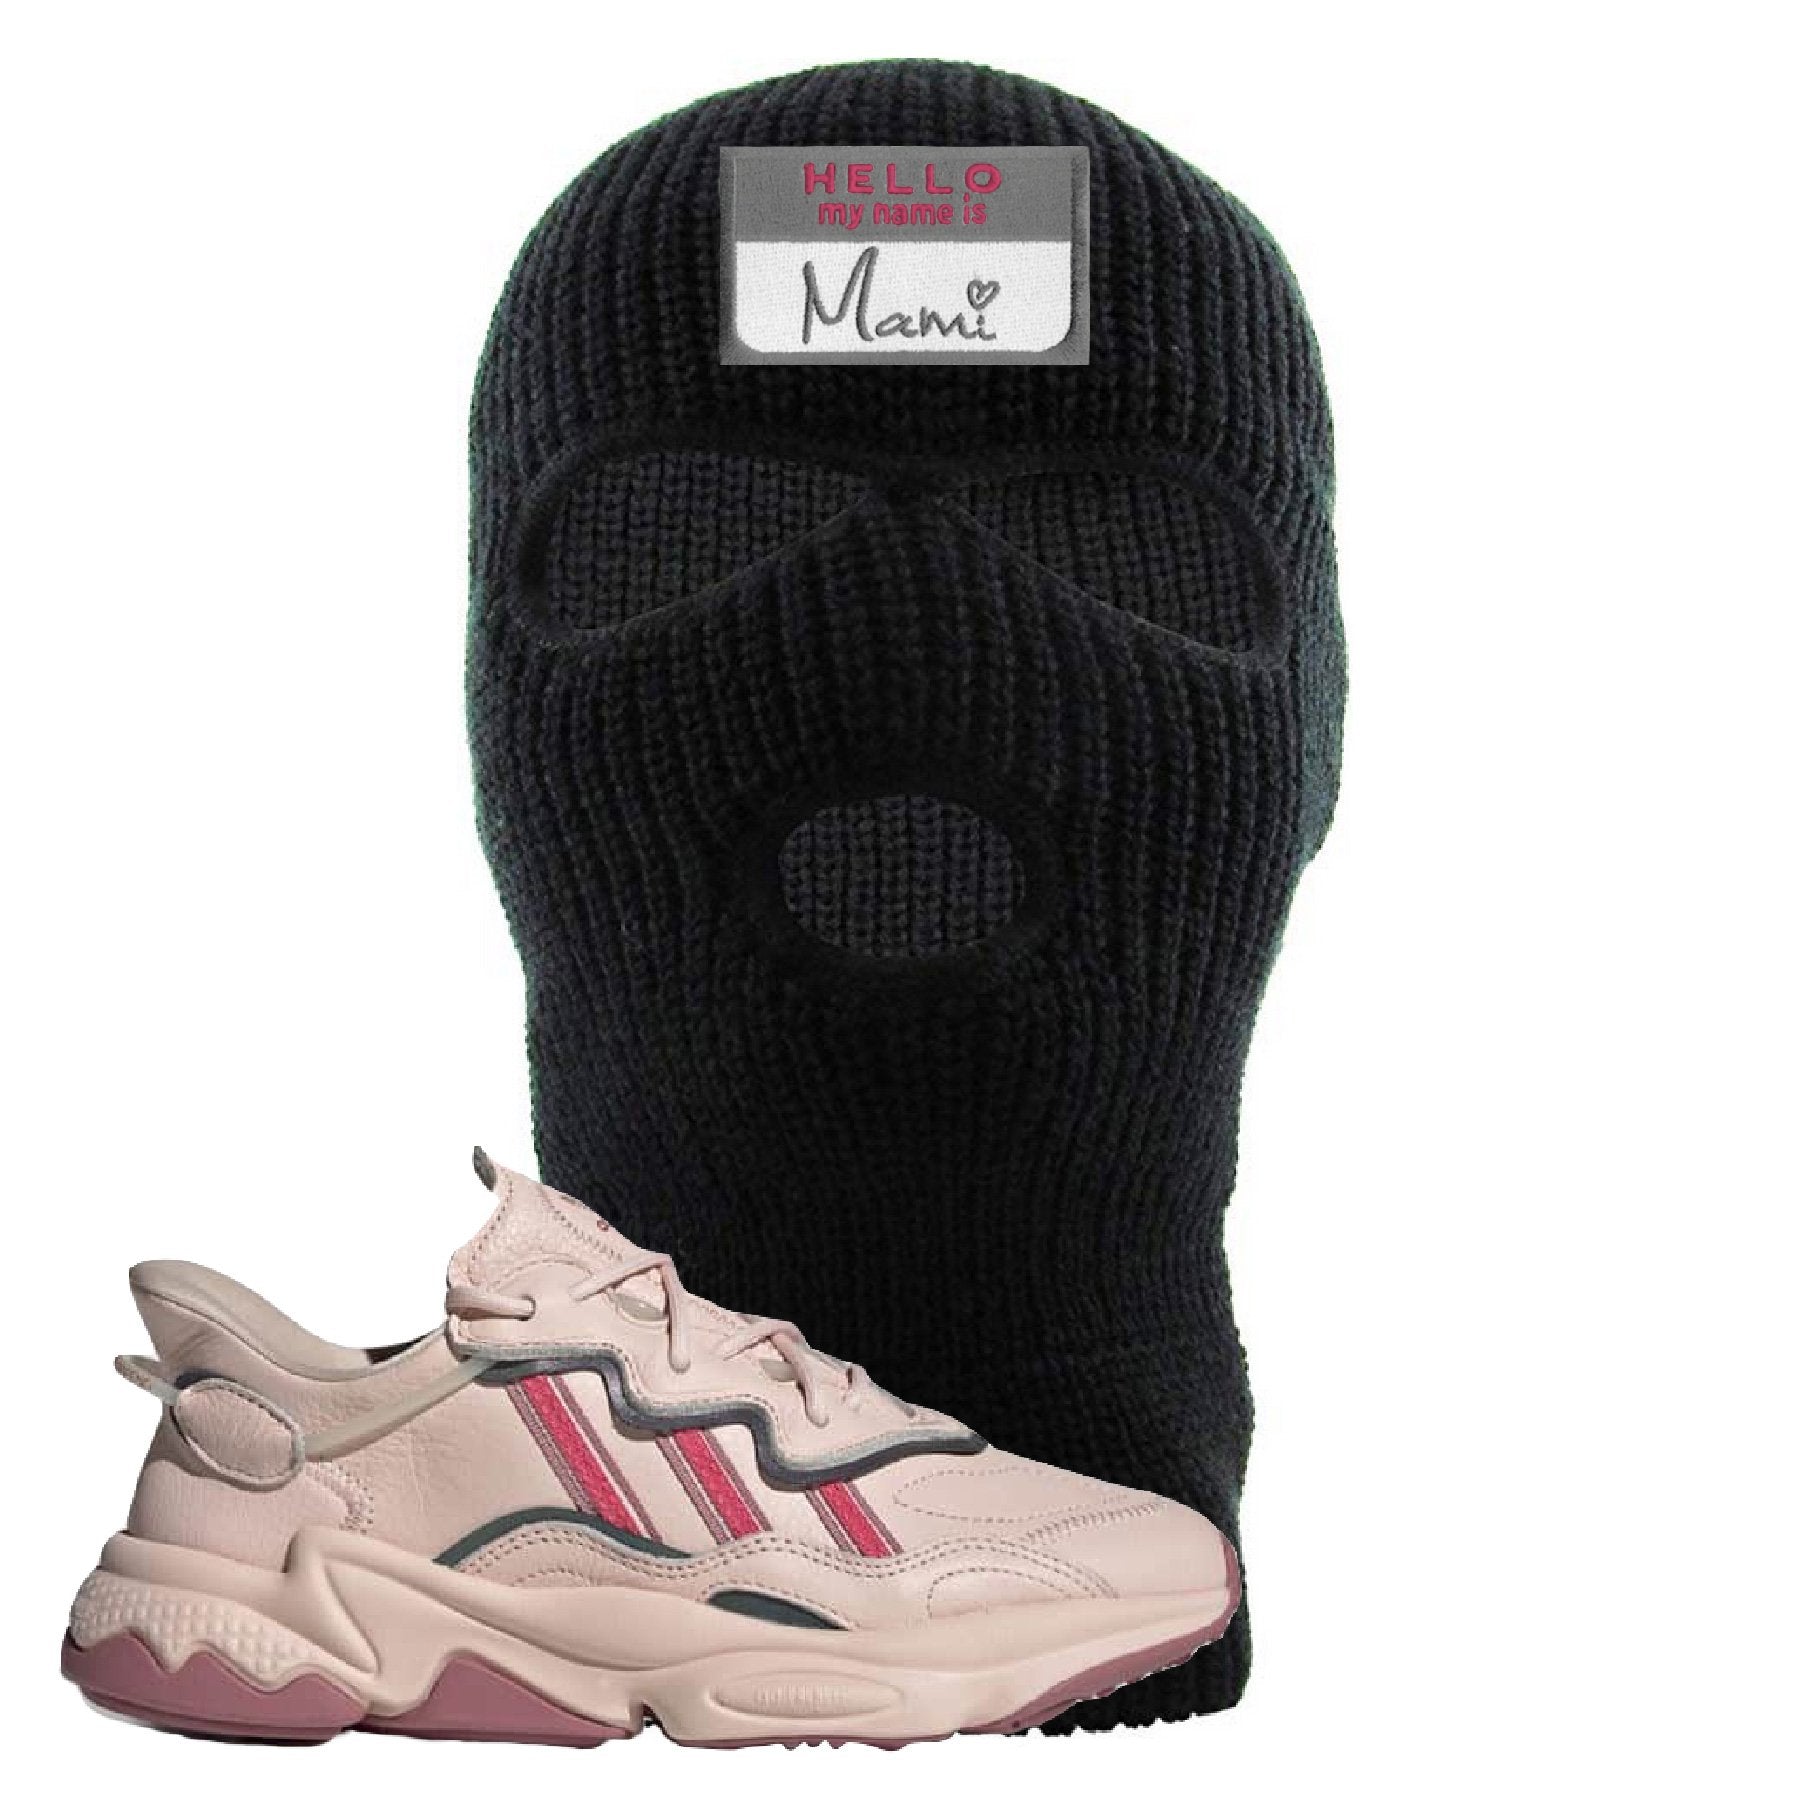 Adidas WMNS Ozweego Icy Pink Hello My Name is Mami Black Sneaker Hook Up Ski Mask